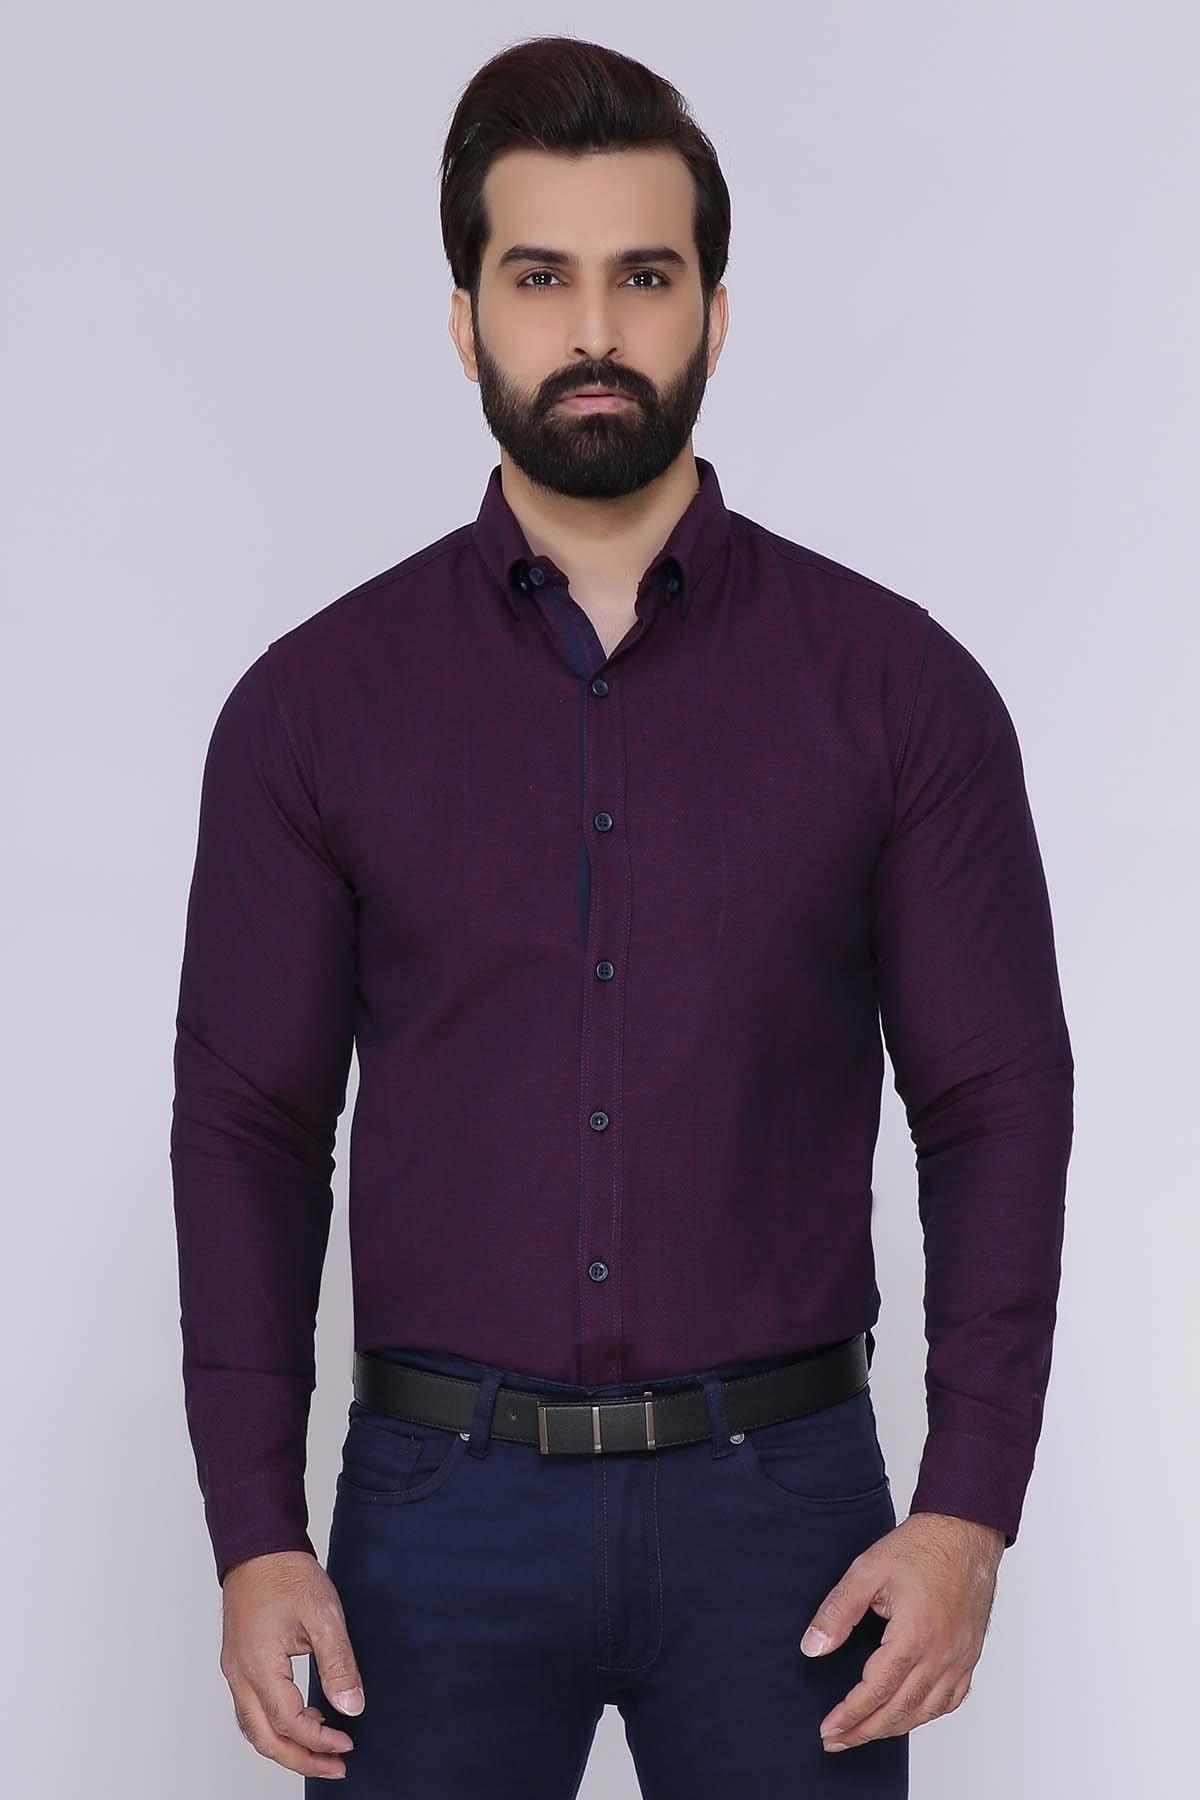 CASUAL SHIRTS FULL SLEEVE PURPLE at Charcoal Clothing